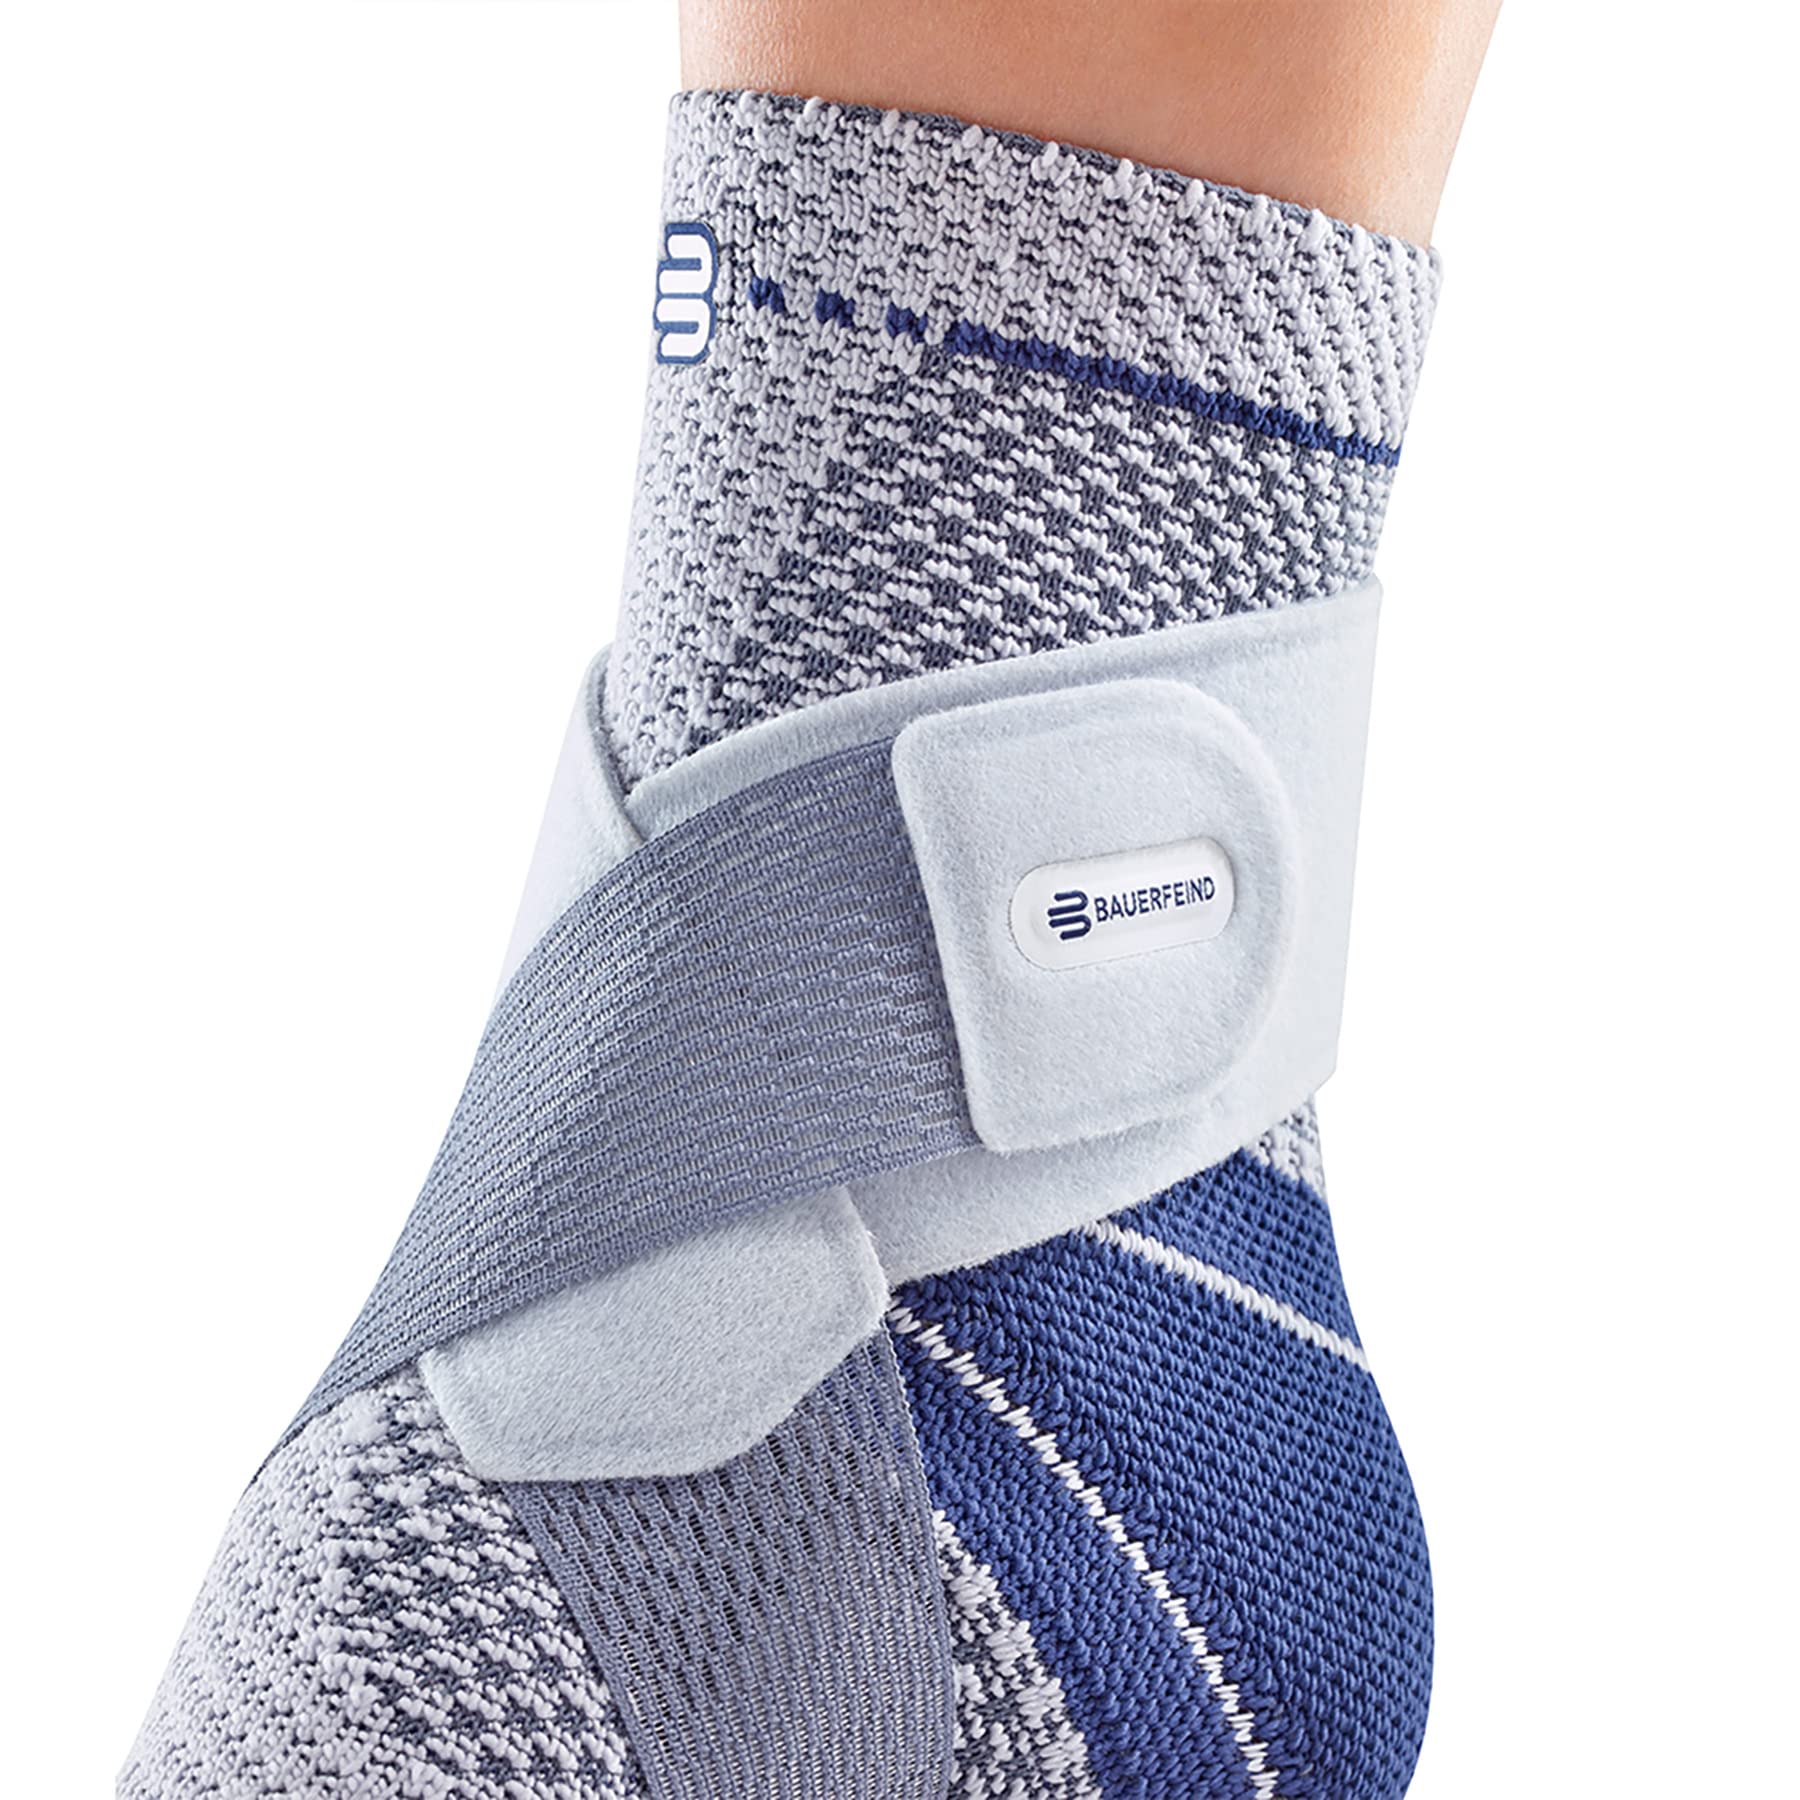 Bauerfeind - MalleoTrain Plus - Ankle Brace - Extra Stability for the Ankle Joints and Tendons - Right Foot - Size 2 - Color Titanium